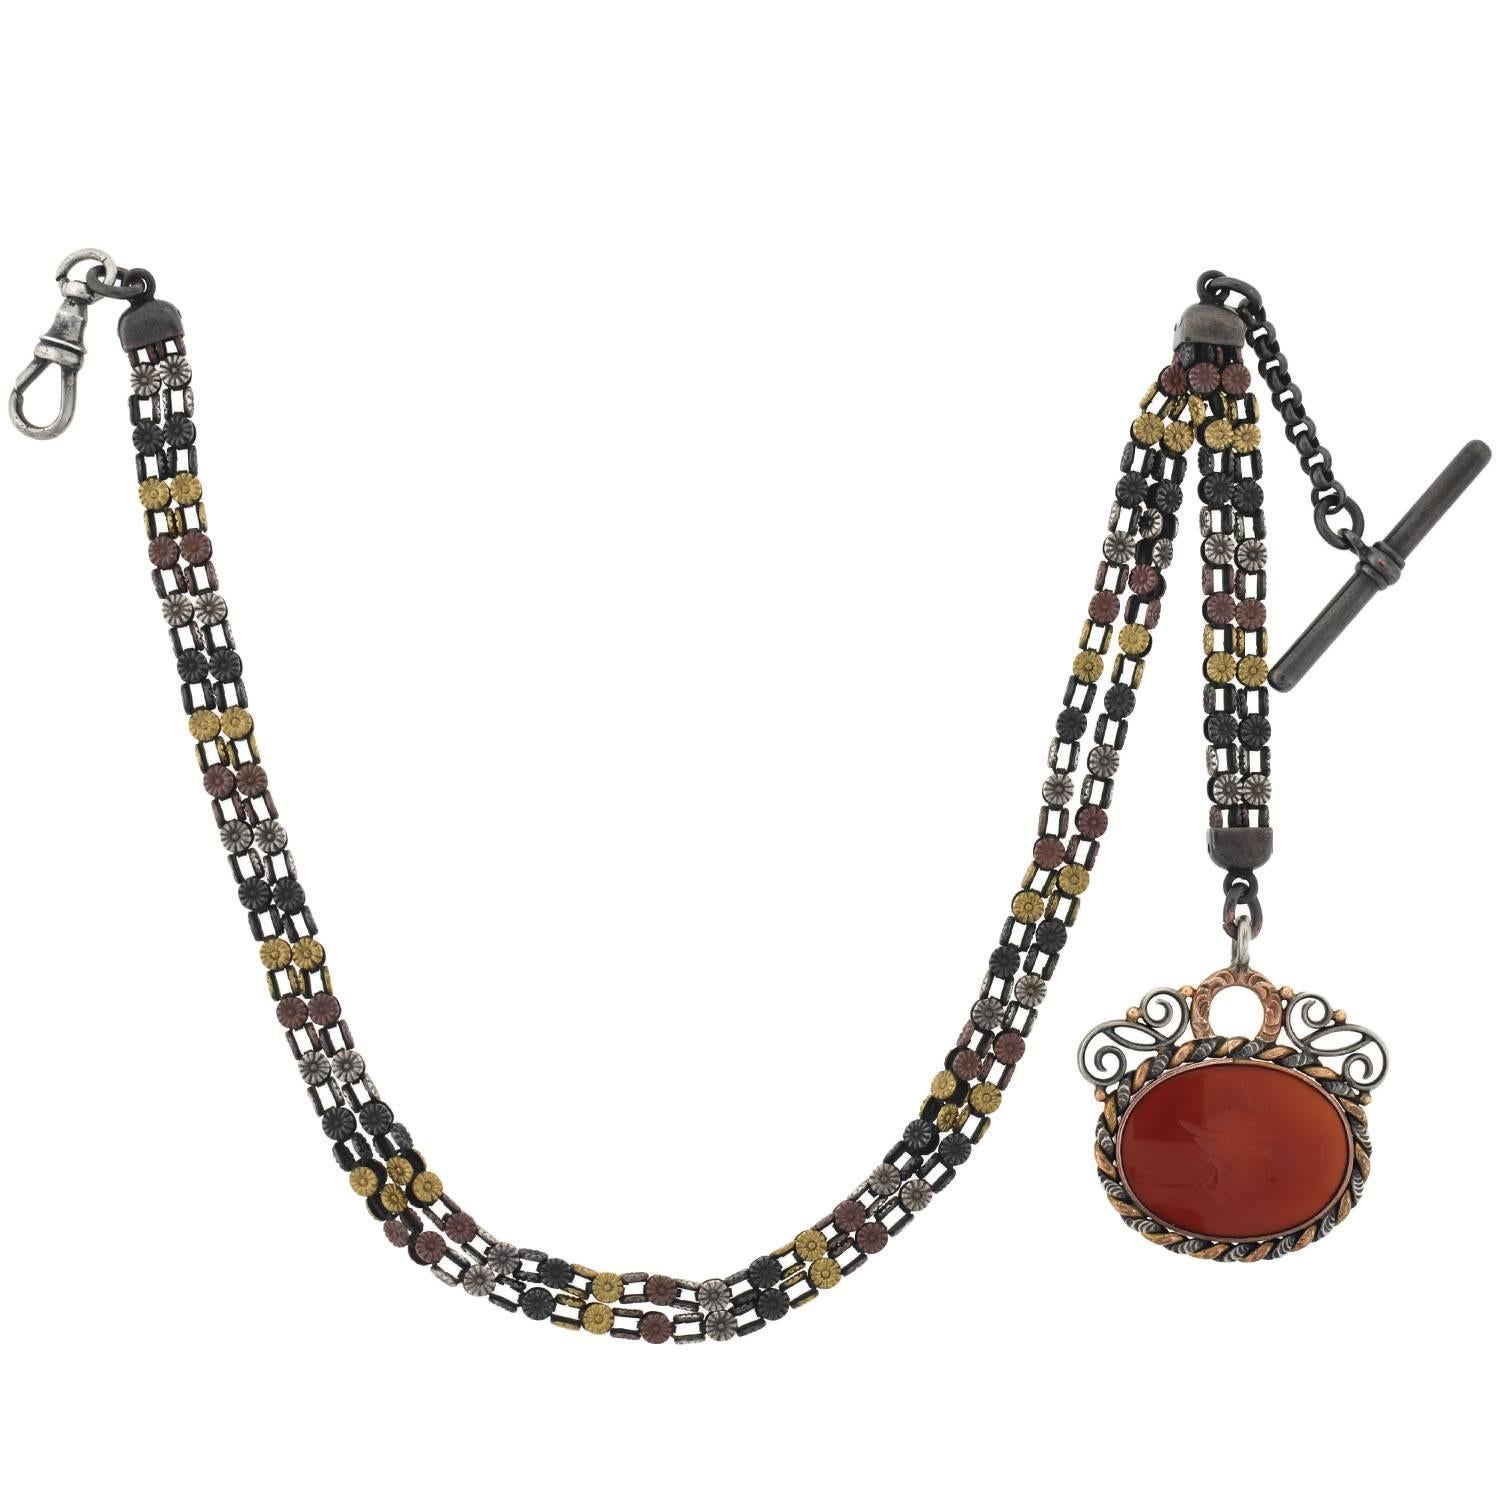 Victorian Shakudo Mixed Metals Watch Chain with Carnelian Fob